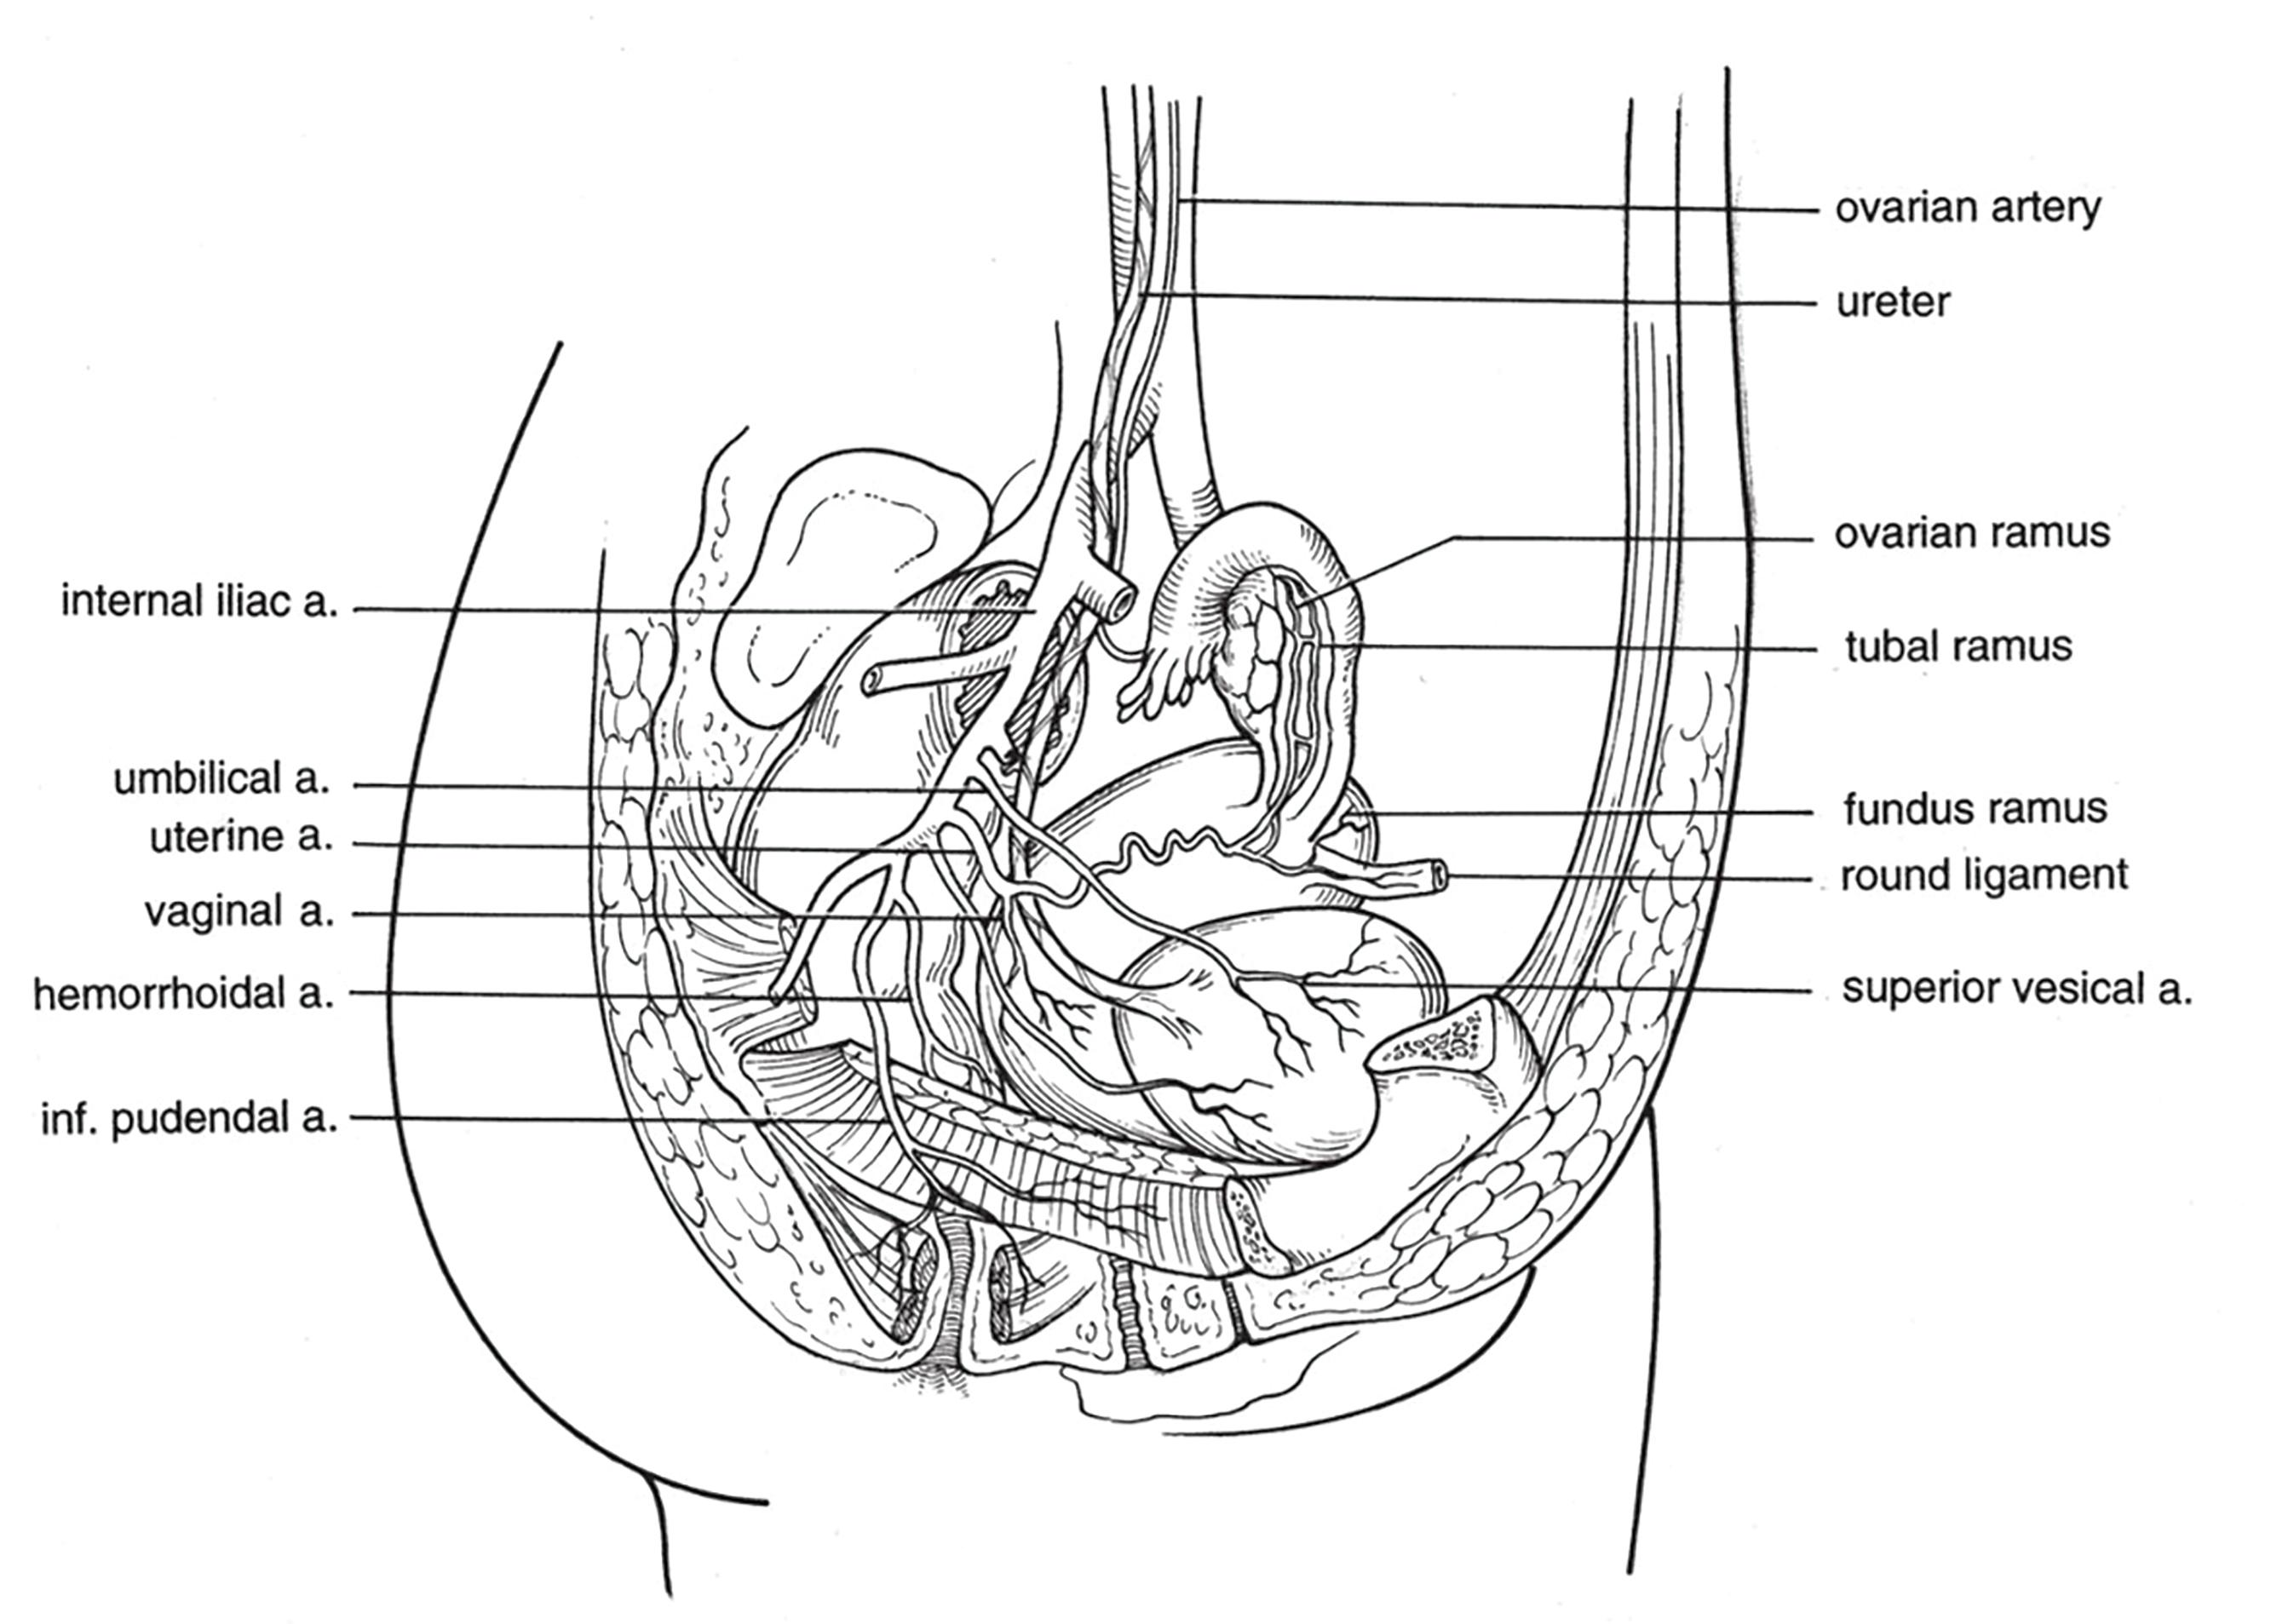 FIGURE 3, Arterial vessels of the female organs (lateral view).